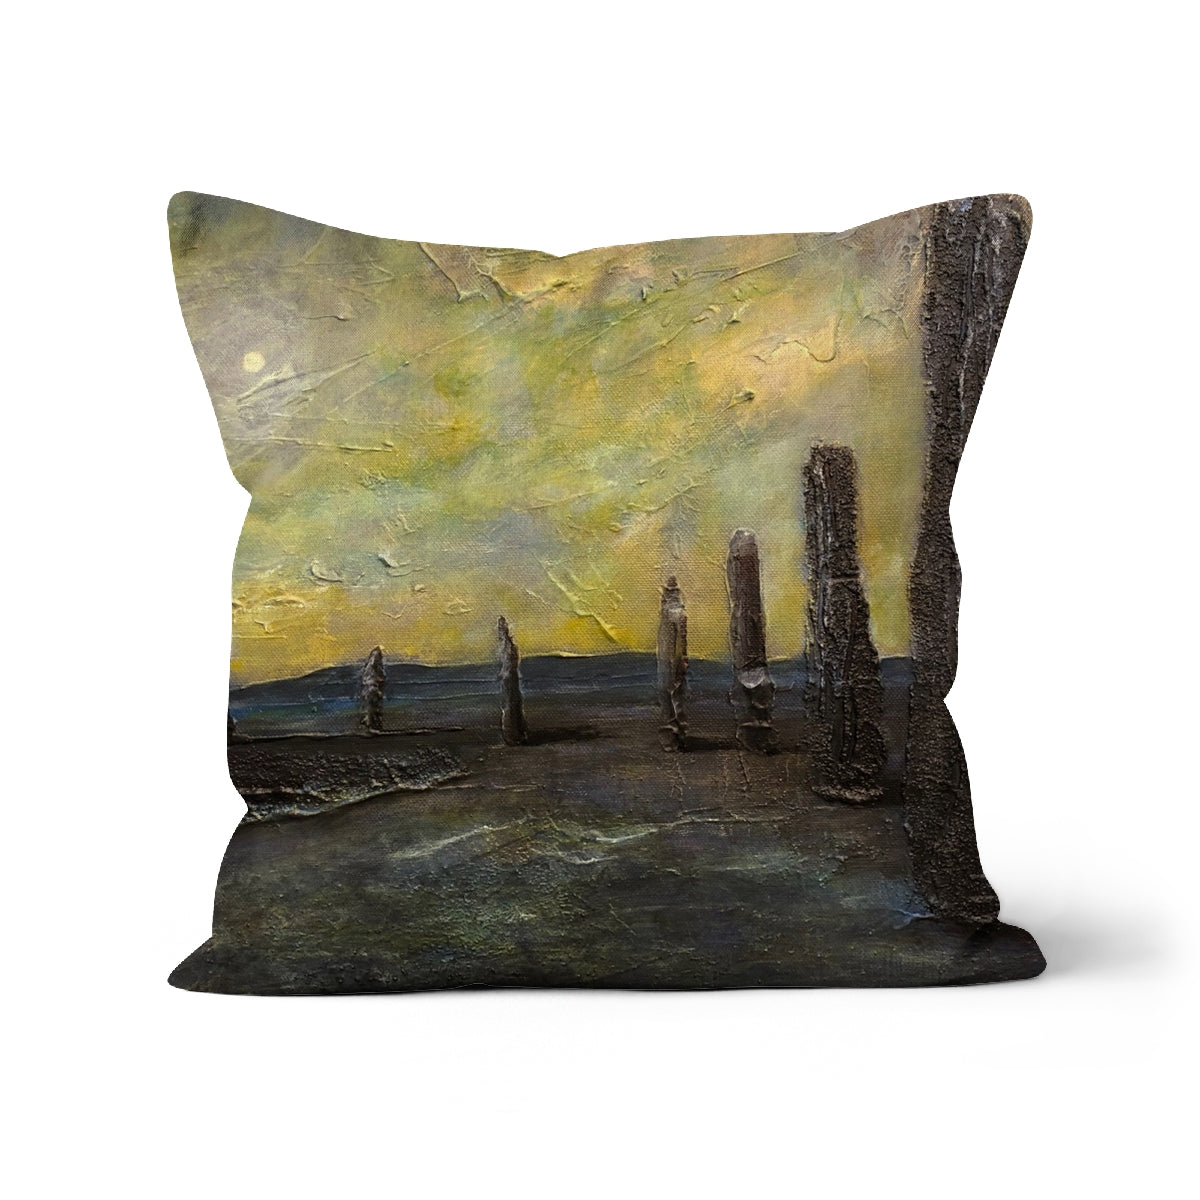 An Ethereal Ring Of Brodgar Art Gifts Cushion-Cushions-Orkney Art Gallery-Linen-16"x16"-Paintings, Prints, Homeware, Art Gifts From Scotland By Scottish Artist Kevin Hunter